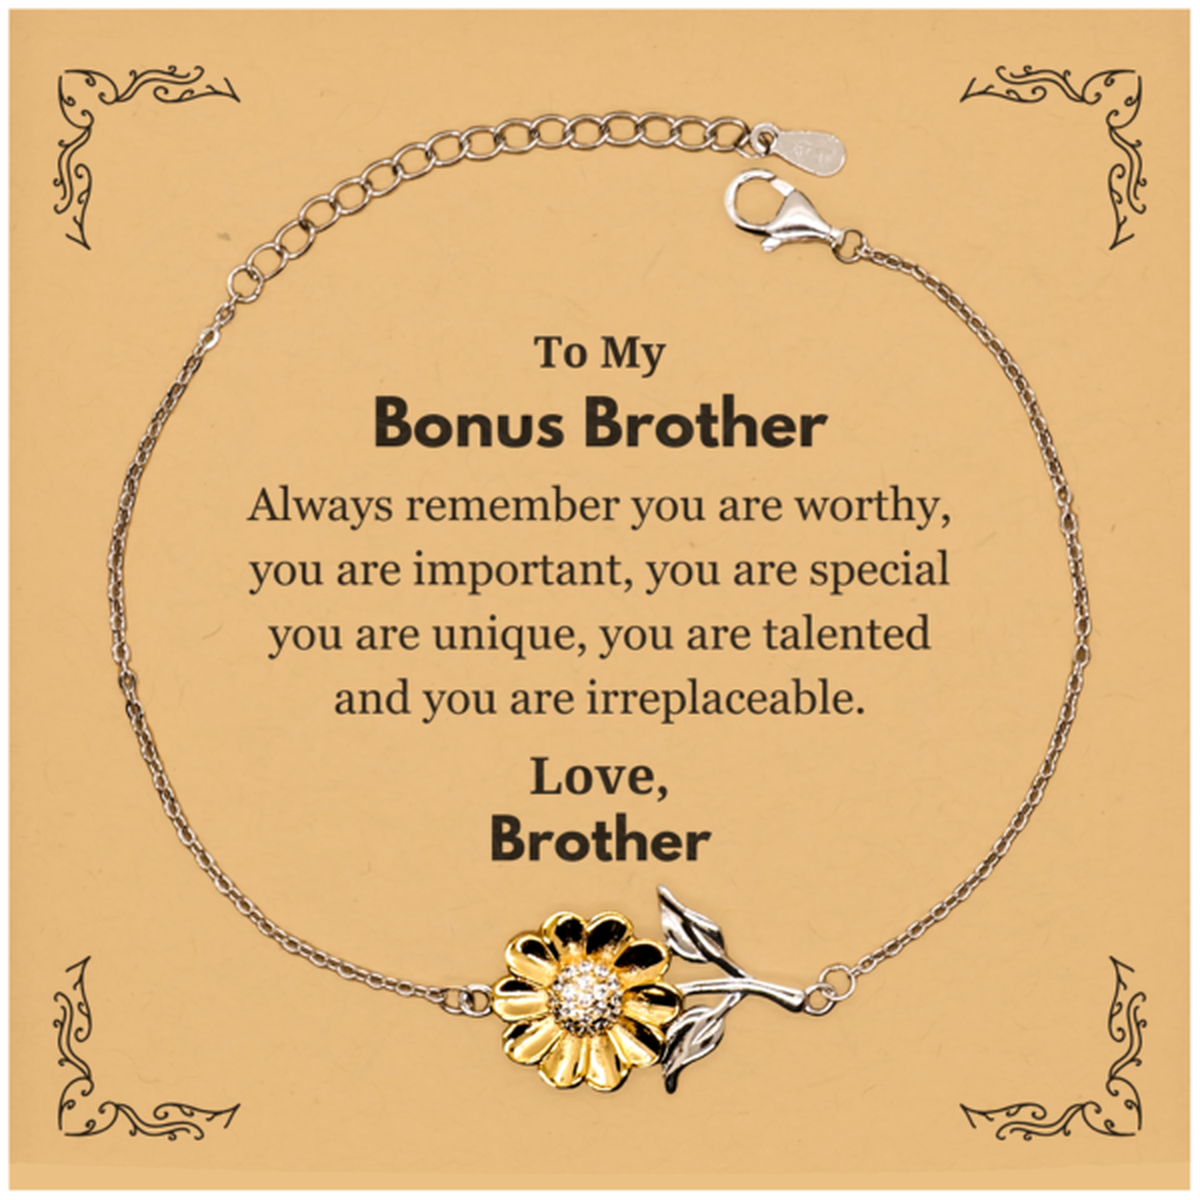 Bonus Brother Birthday Gifts from Brother, Inspirational Sunflower Bracelet for Bonus Brother Christmas Graduation Gifts for Bonus Brother Always remember you are worthy, you are important. Love, Brother